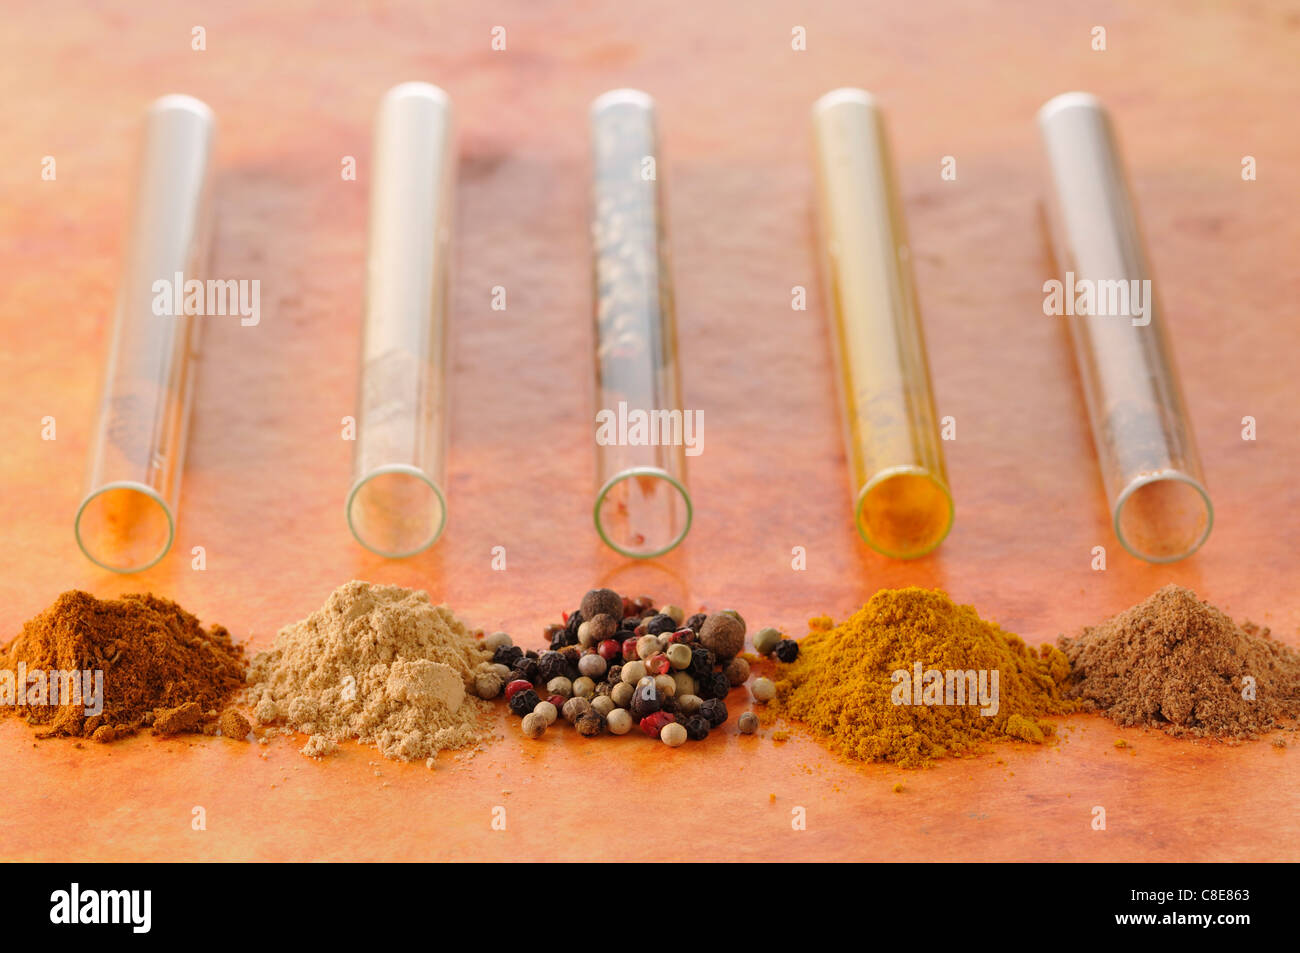 Test tubes and spices Stock Photo